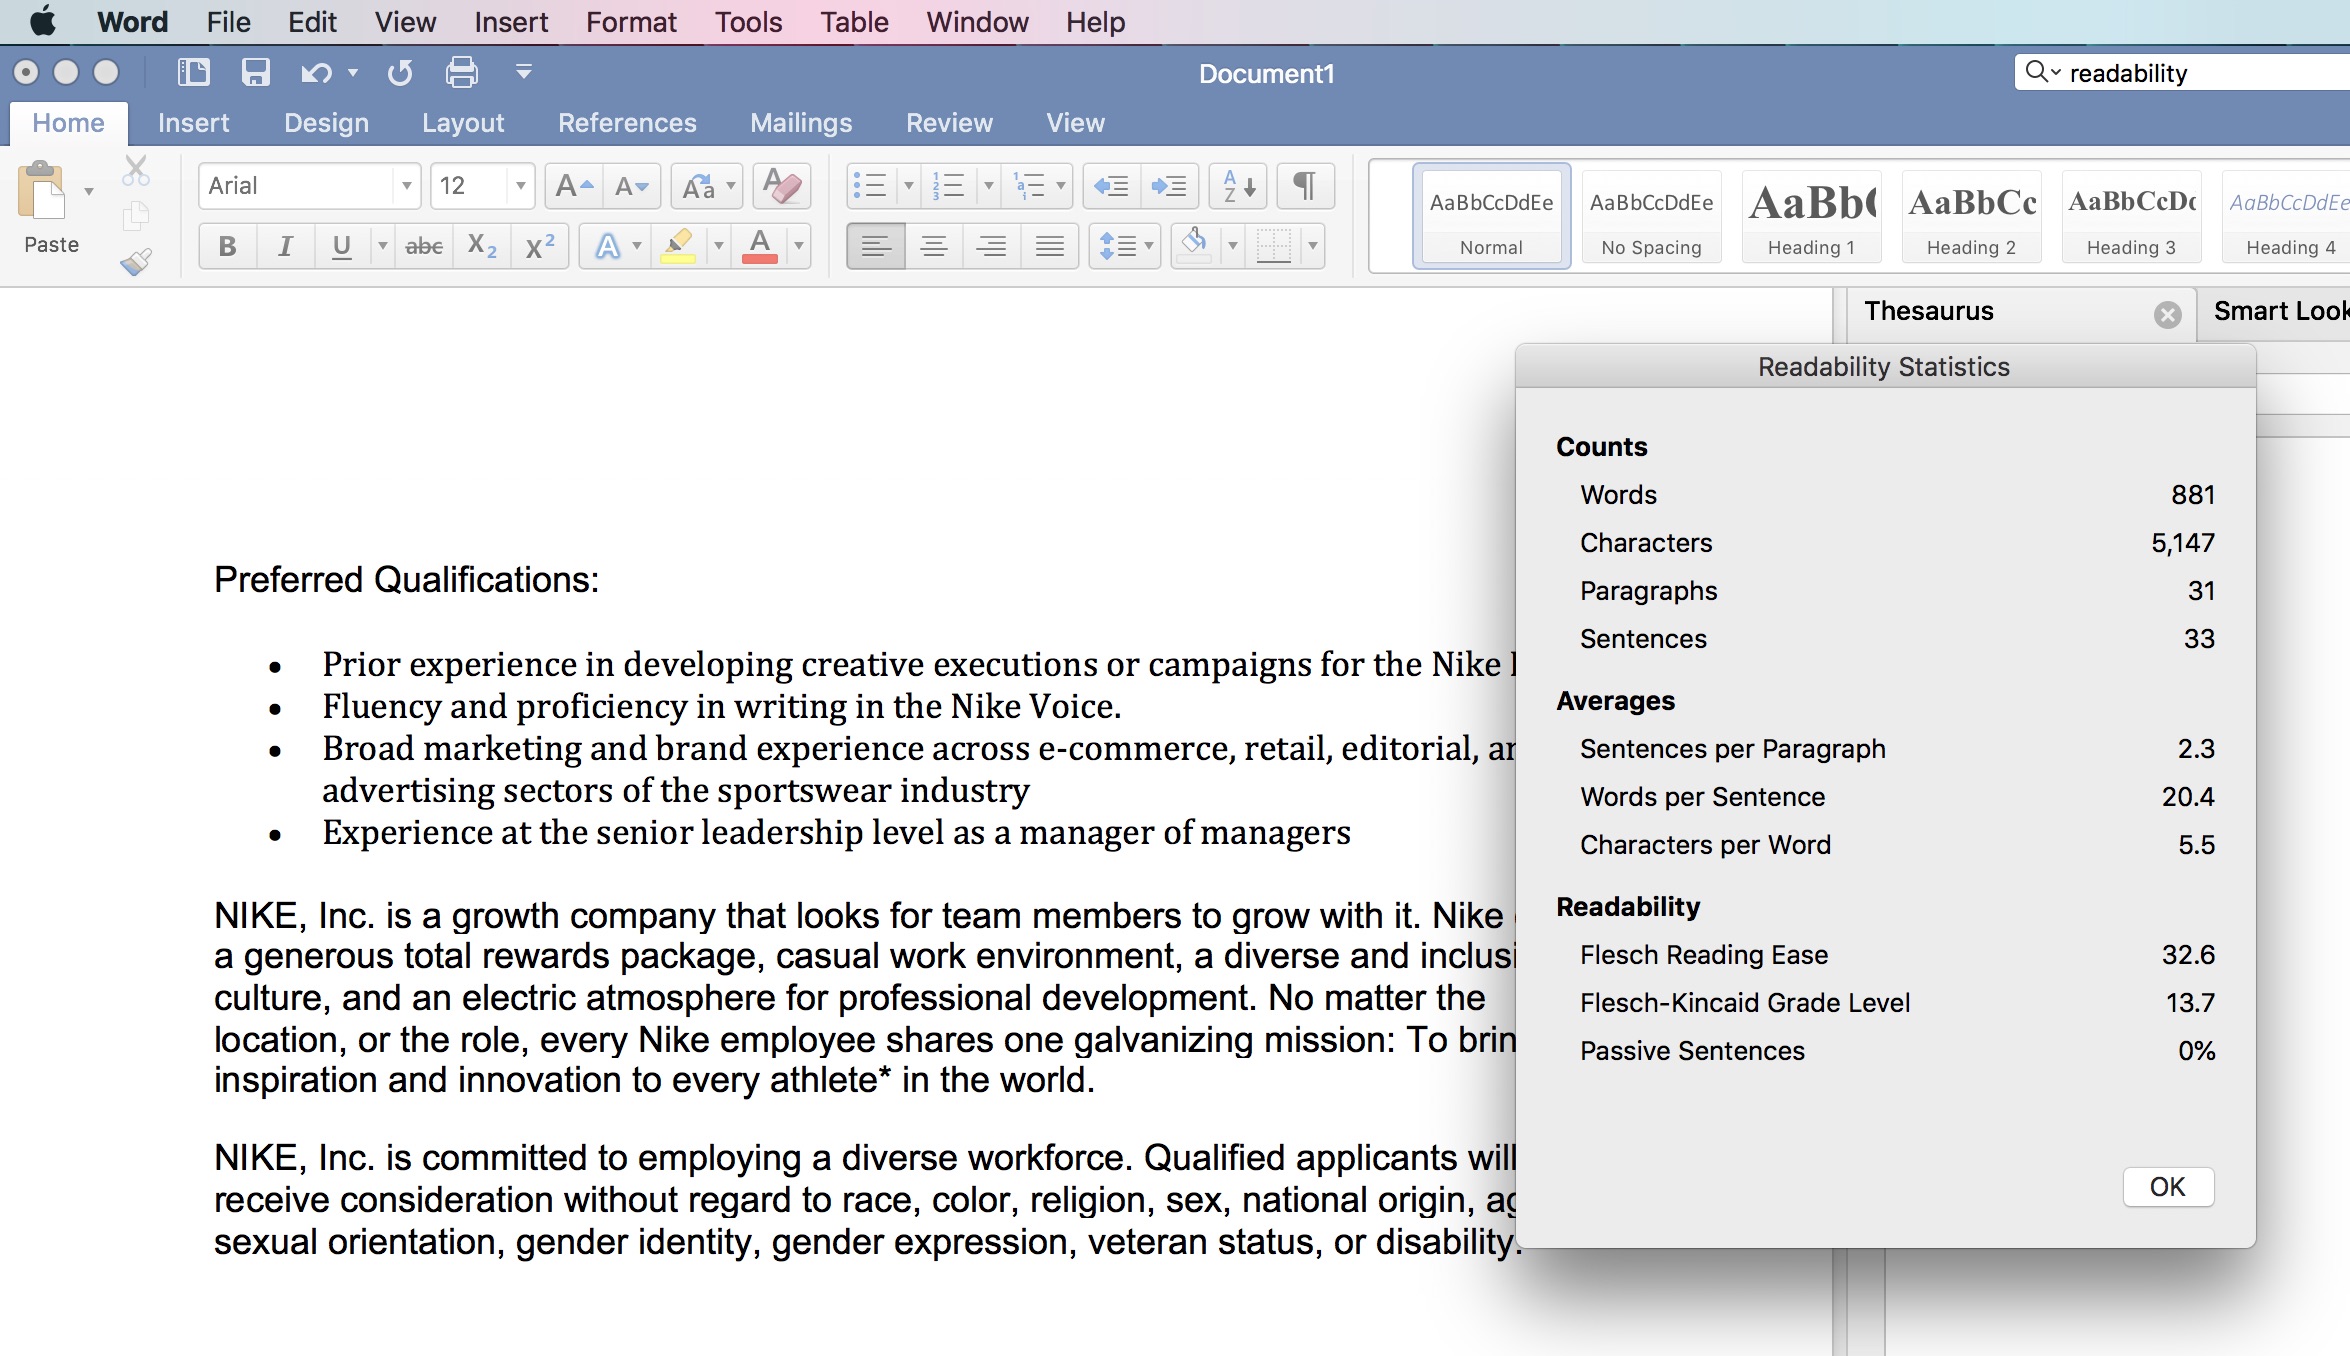 Microsoft Word offers readability stats to analyze your text